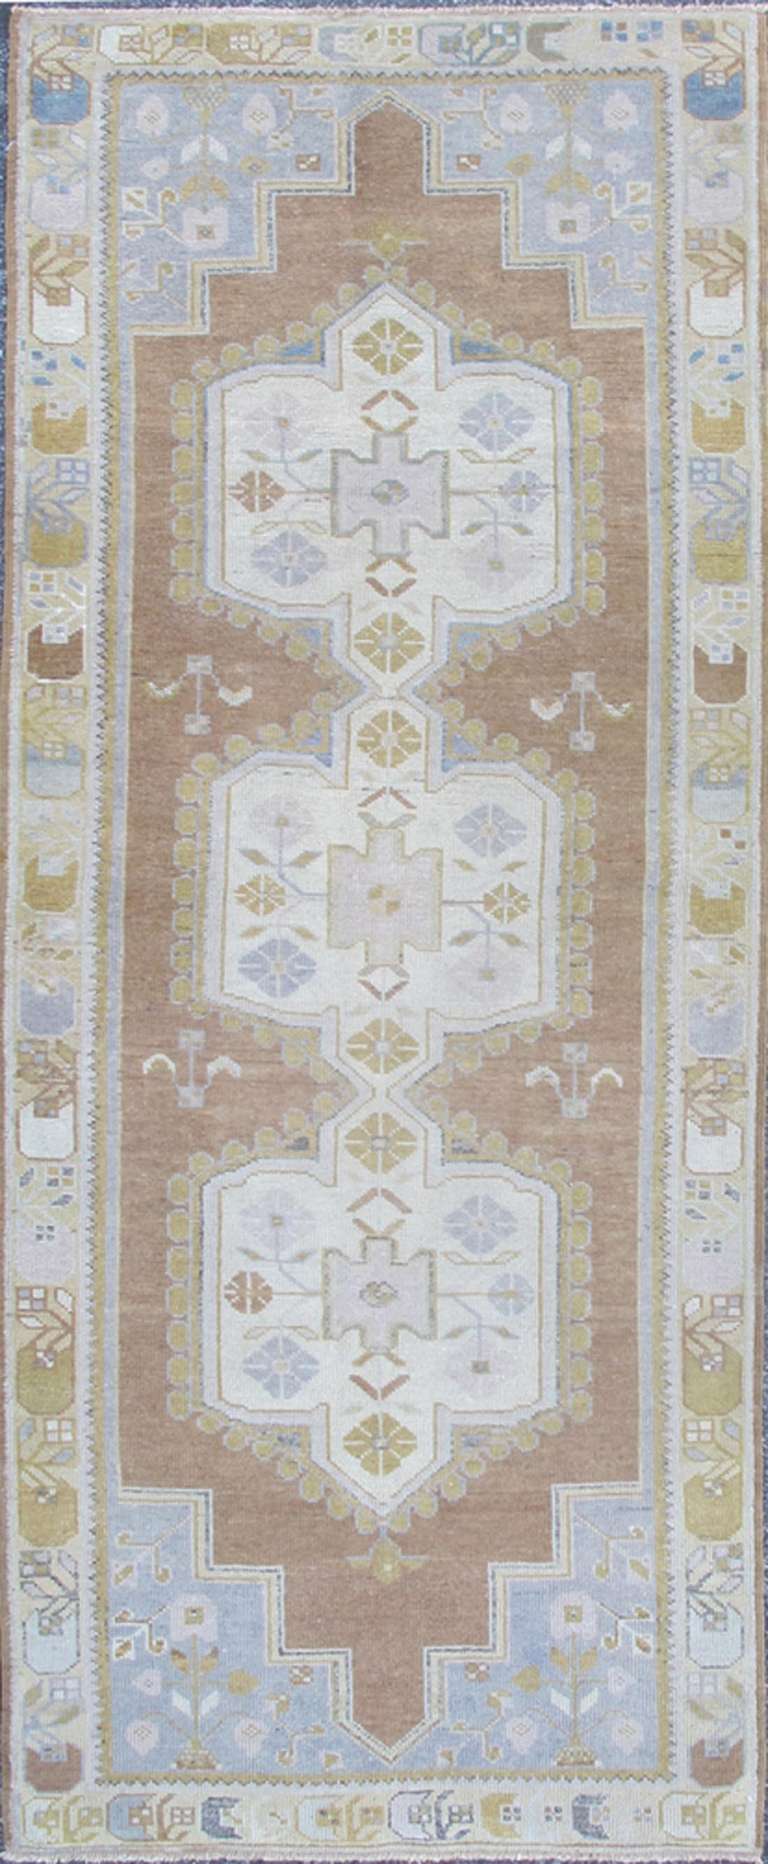 This magnificent Oushak beautifully illustrates the impressive craftsmanship and design of Turkish weavers. This Muted design gives the illusion of large muted medallions flowing through the rugs center field of grayish, taupe hues. Linear branches